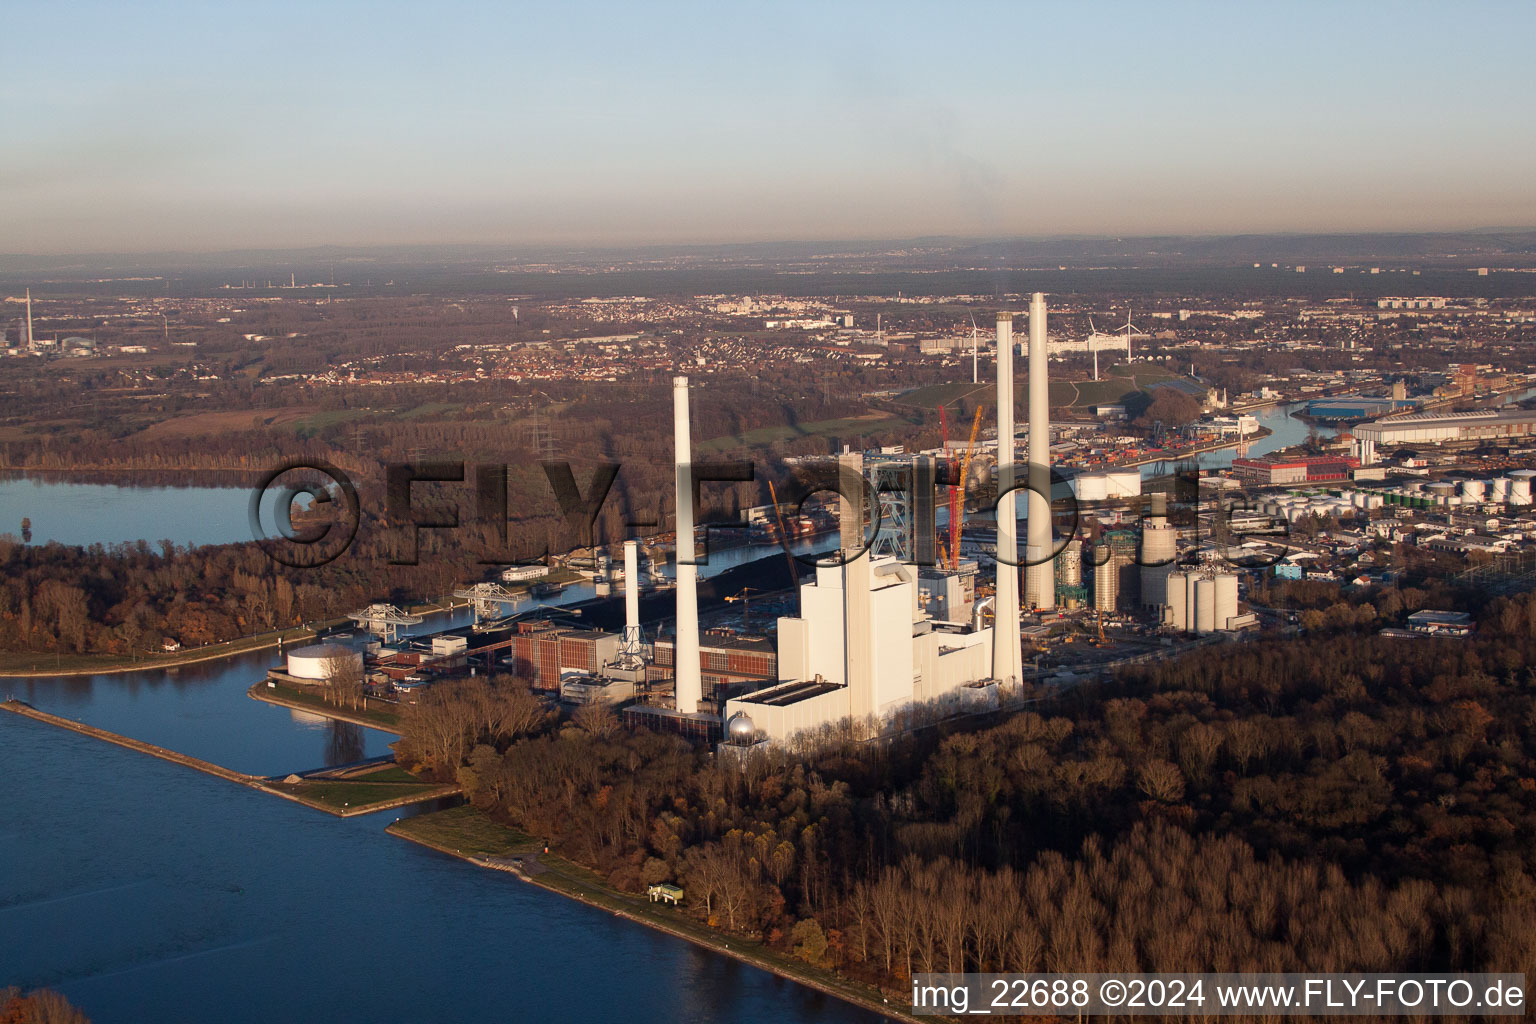 EnBW power plant in the district Rheinhafen in Karlsruhe in the state Baden-Wuerttemberg, Germany from above